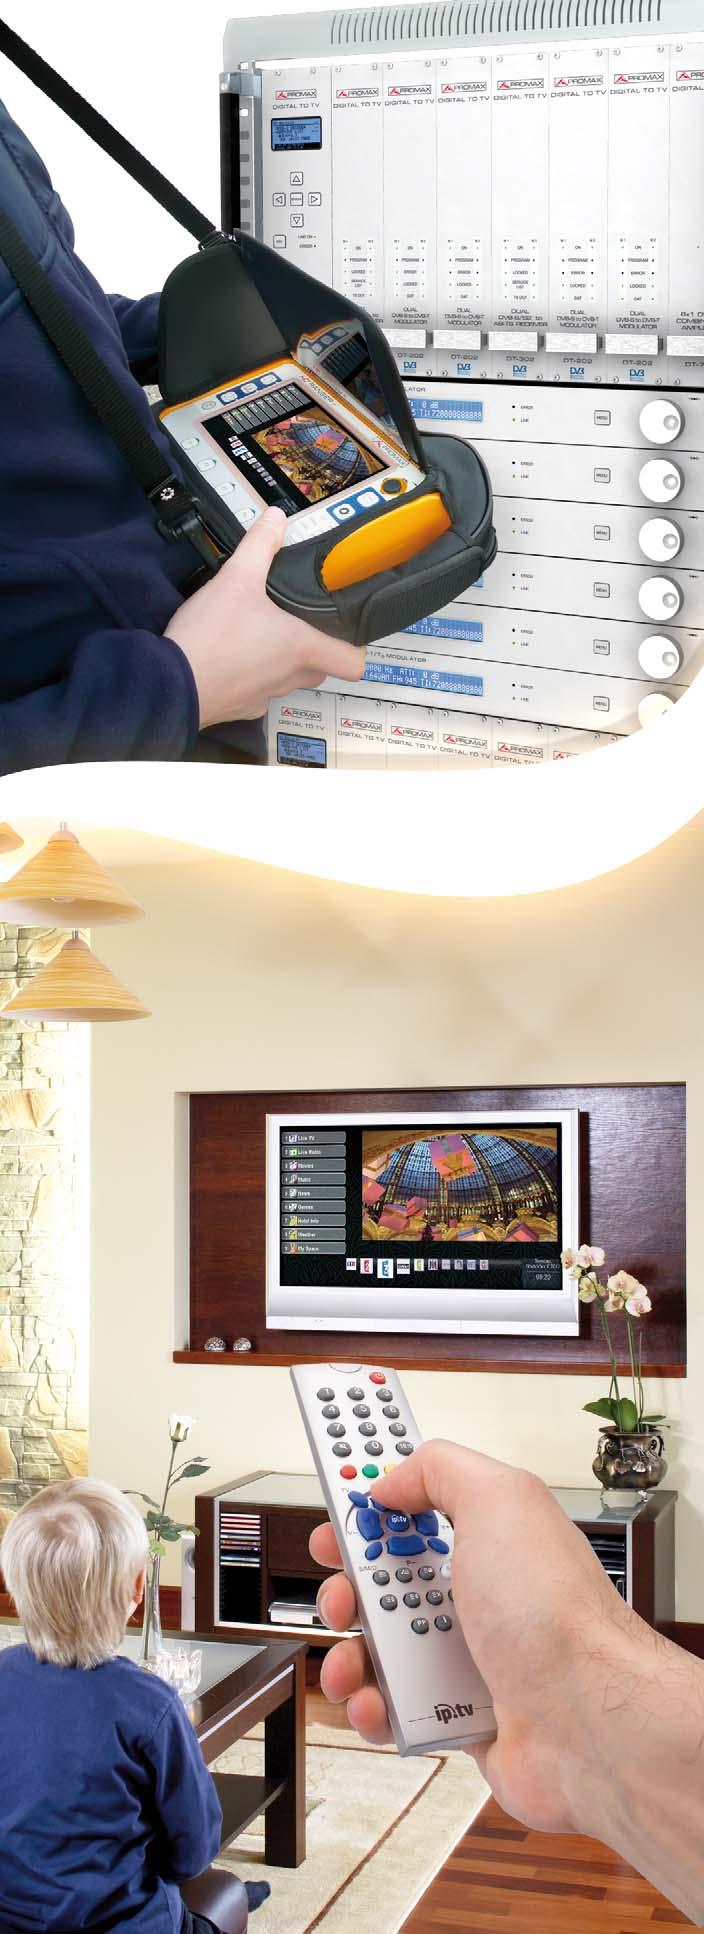 9 IPTV Input IP input Interfacing with IPTV equipment IPTV stands for TV over IP networks. It actually means TV over any type of IP packet based distribution network.